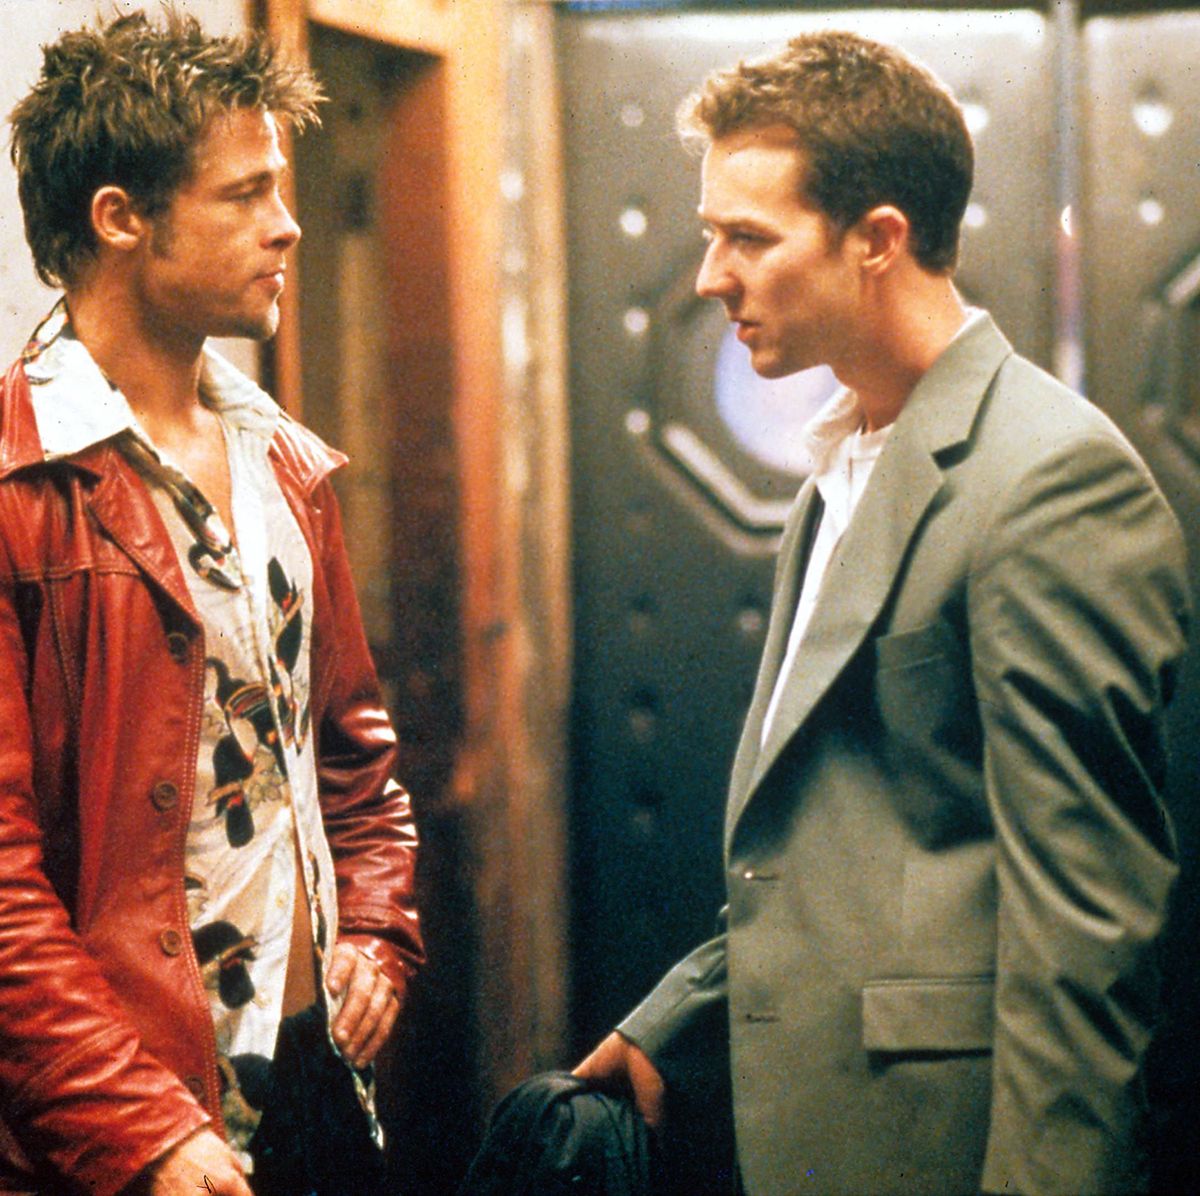 Fight Club Director David Fincher Doesn't Know How To Help Men